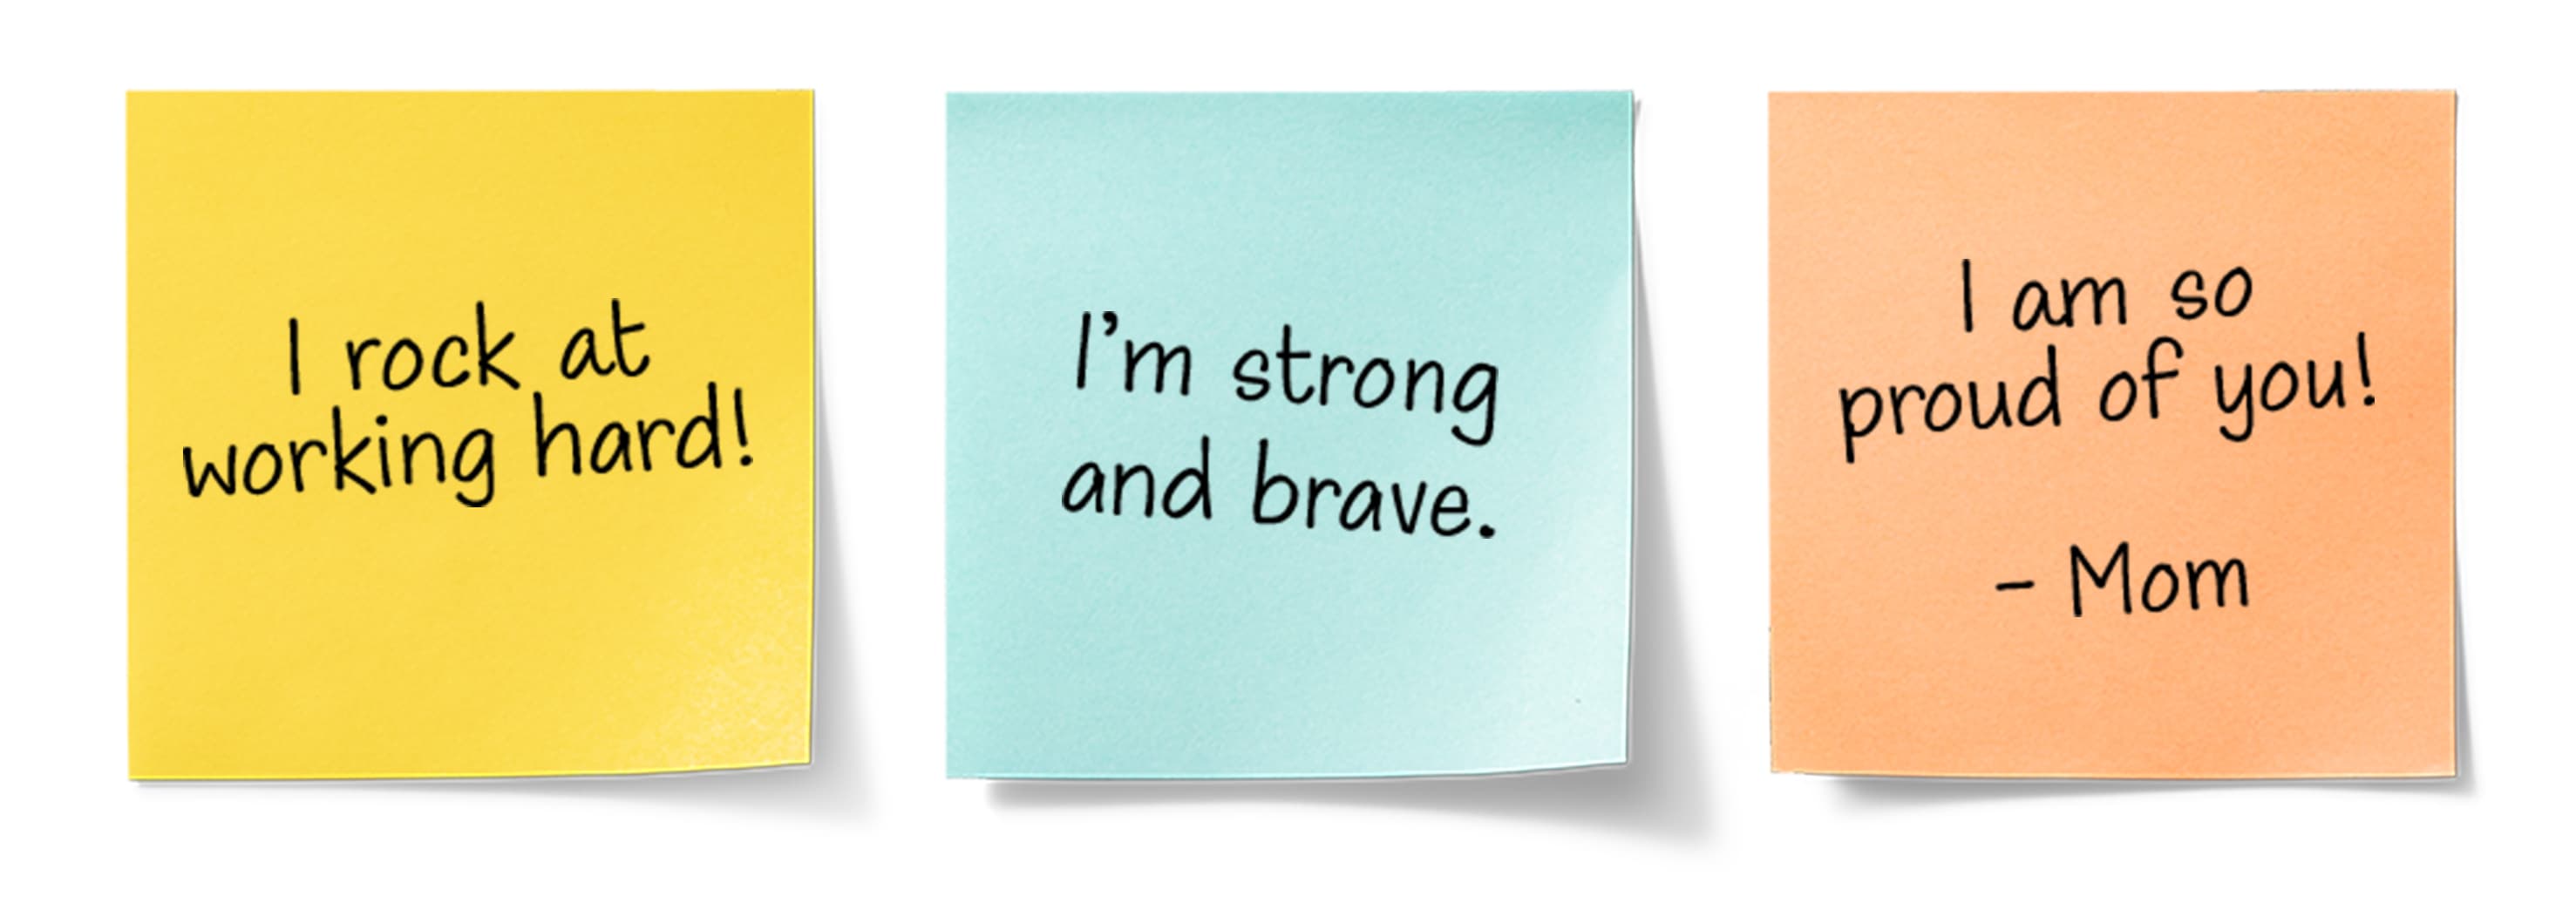 Three sticky notes that have encouraging quotes